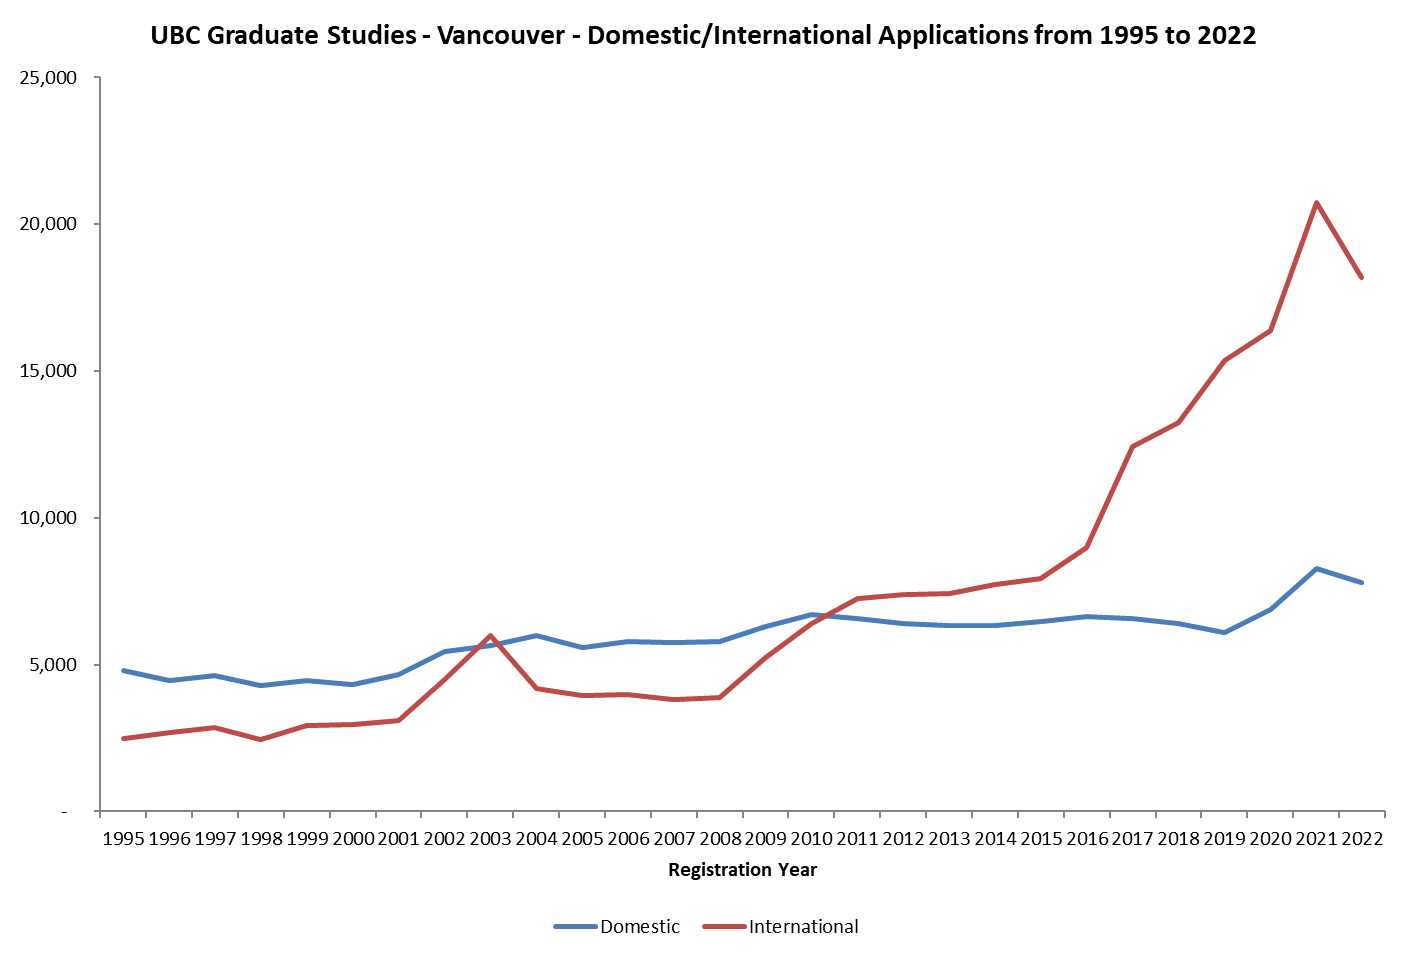 UBC Graduate Studies - Masters and Doctoral International Application Numbers from 1995 to 2022